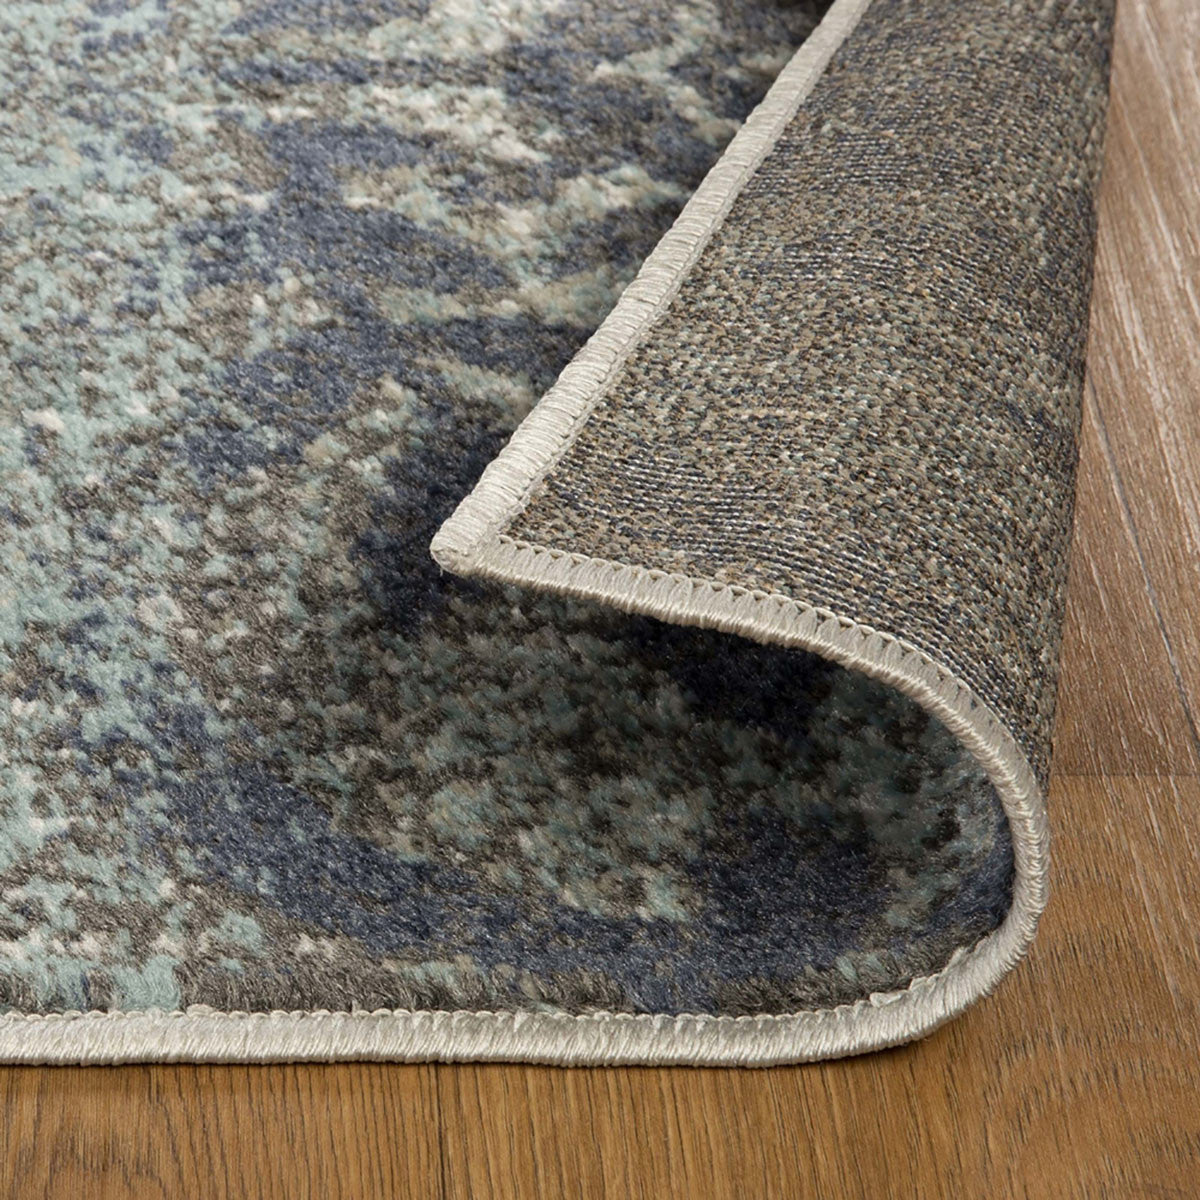 10' Teal And Gray Damask Distressed Stain Resistant Runner Rug